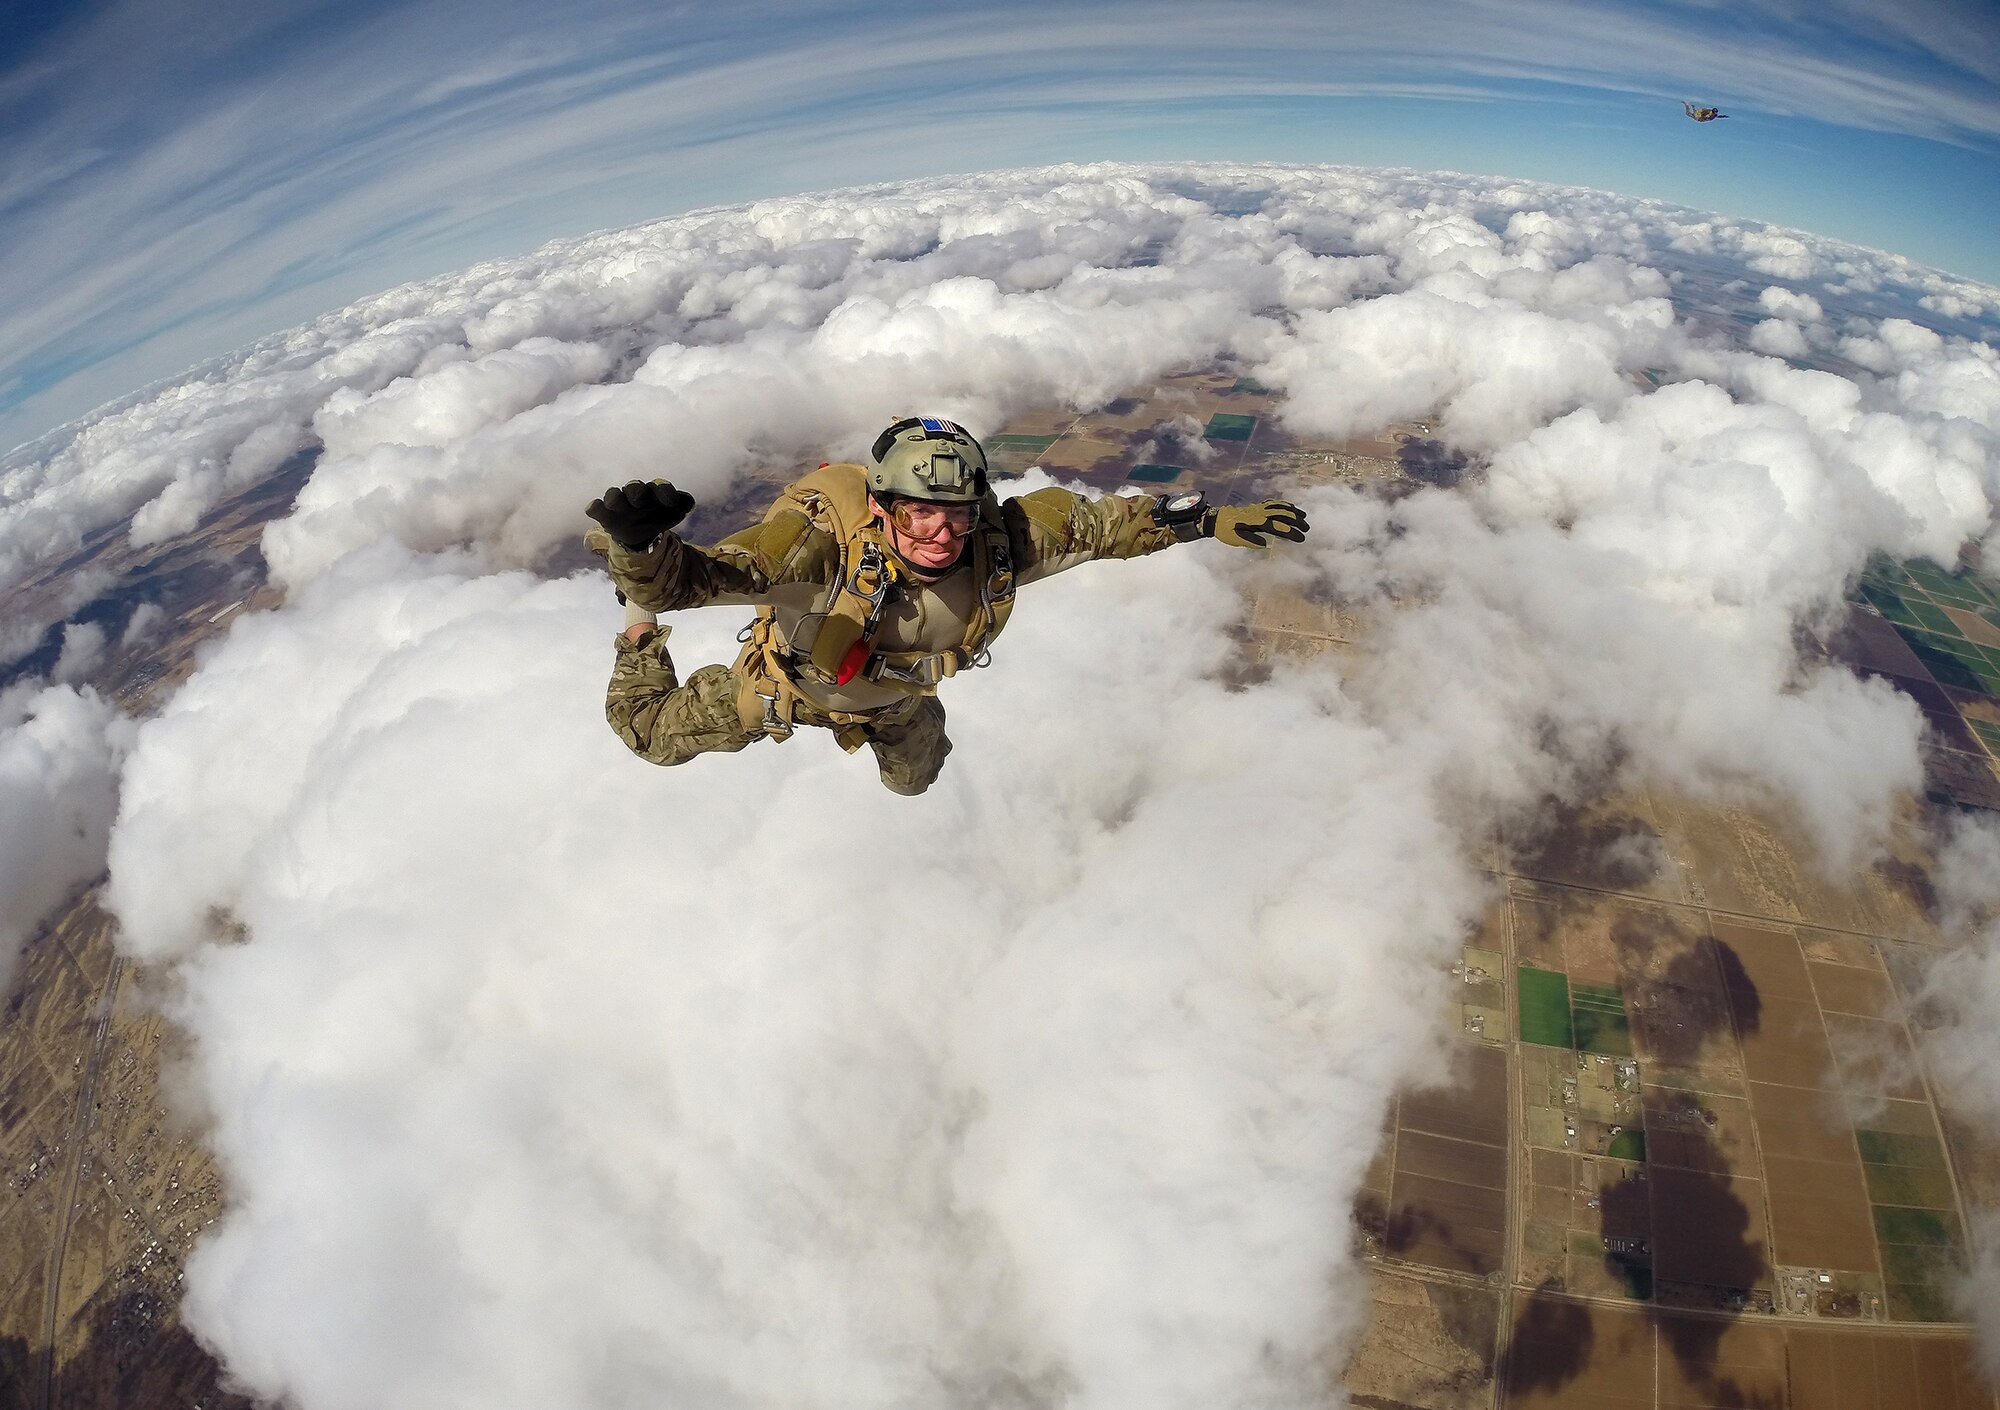 DAVIS-MONTHAN AIR FORCE BASE, Ariz. – A pararecueman (PJ) assigned to the 306th Rescue Squadron prepares to deploy his parachute over the Eloy, Arizona skies during a training mission March 2. PJ’s are specifically organized, trained and equipped to conduct personnel recovery operations in hostile or denied areas as a primary mission. The 306th RQS is a subordinate unit of the 943rd Rescue Group, which trains and equips Citizen Airmen to perform personnel recovery operations worldwide. (U.S. Air Force photo/Tech. Sgt. Frank Oliver)
